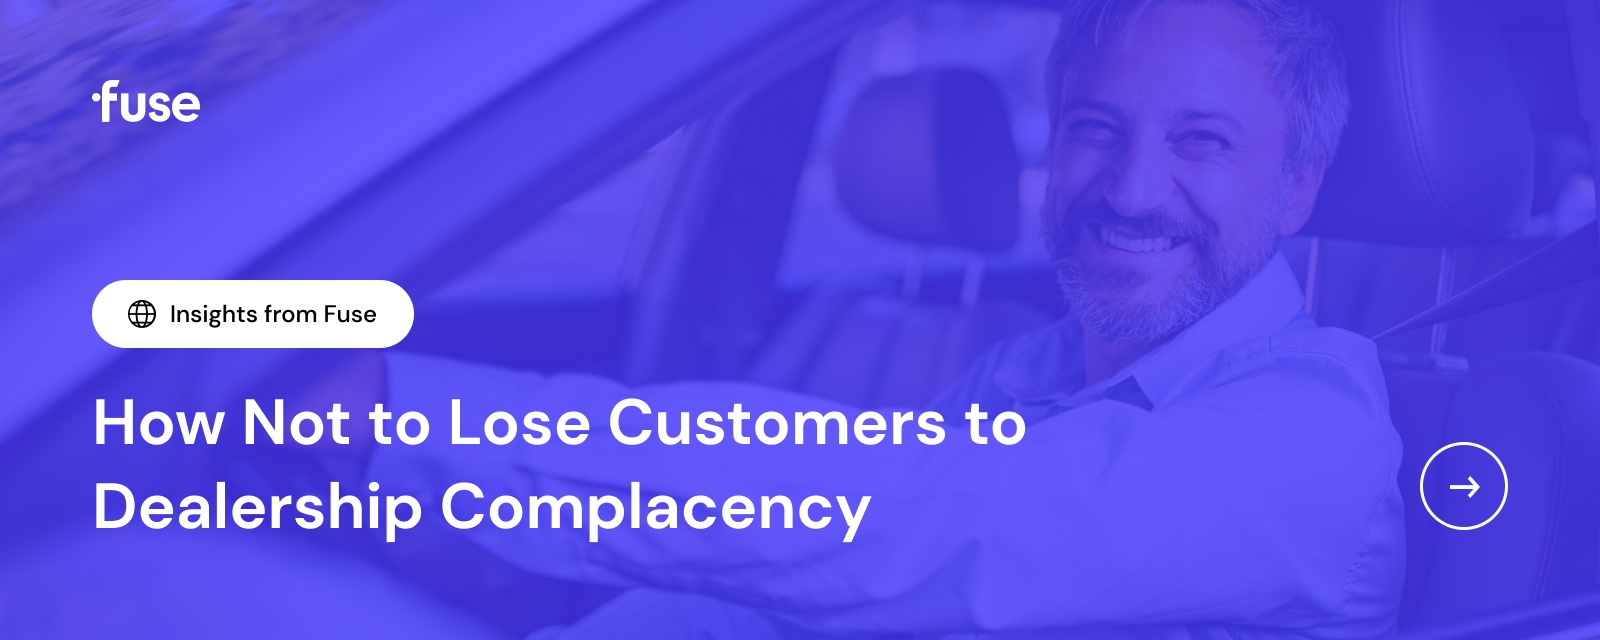 Related Read: How Not to Lose Customers to Dealership Complacency